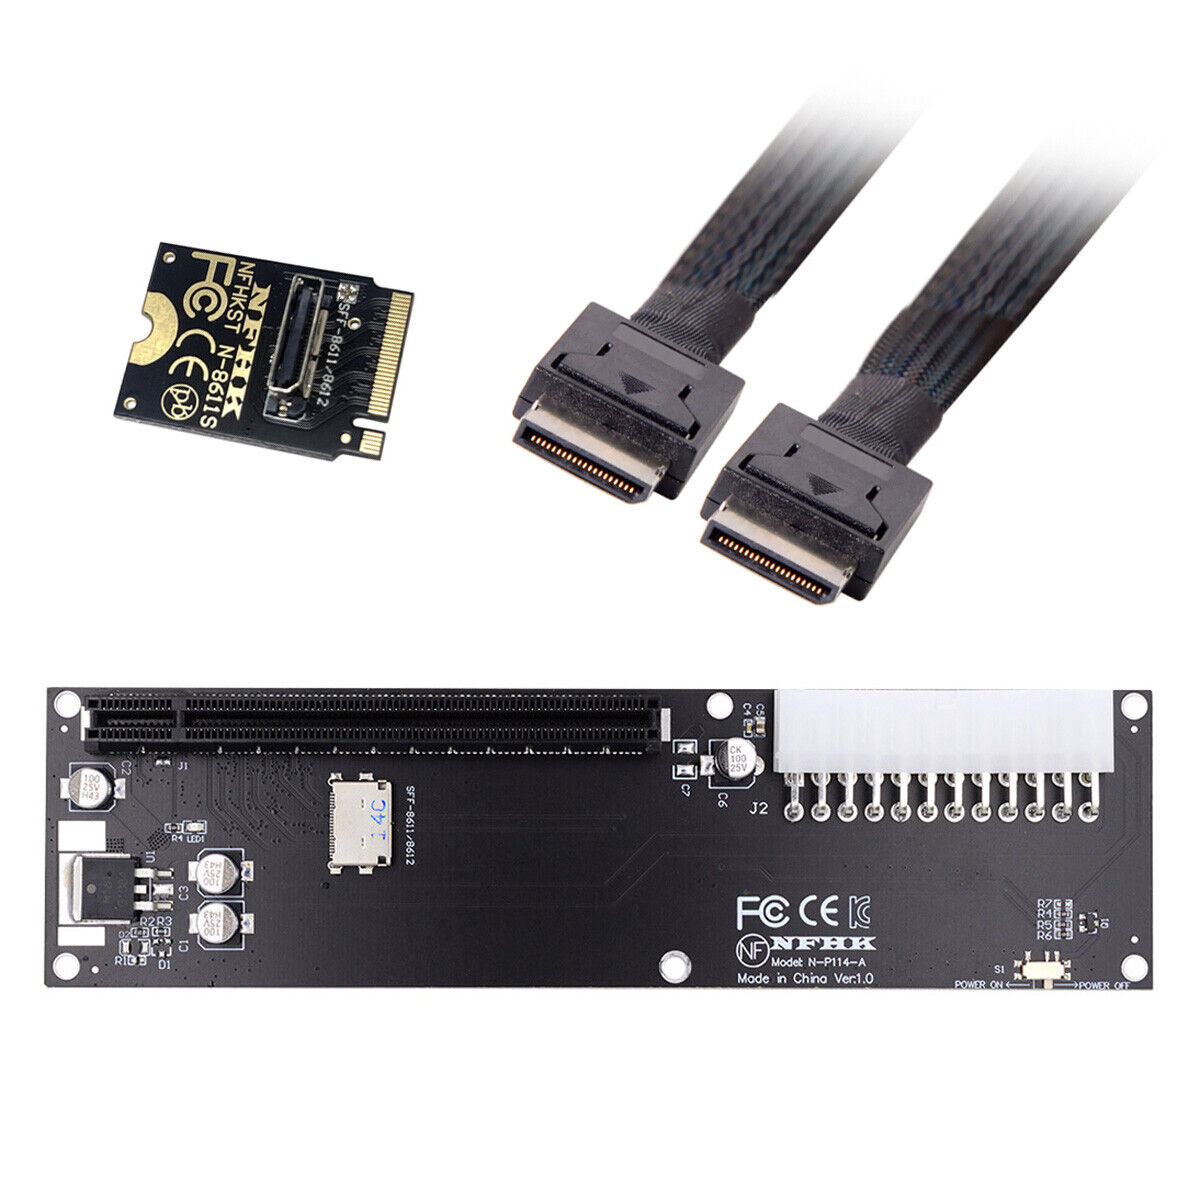 Cablecc Oculink 8612 to PCIE 3.0 M.2 M-key to SFF-8611 Host Adapter for GPD Max2